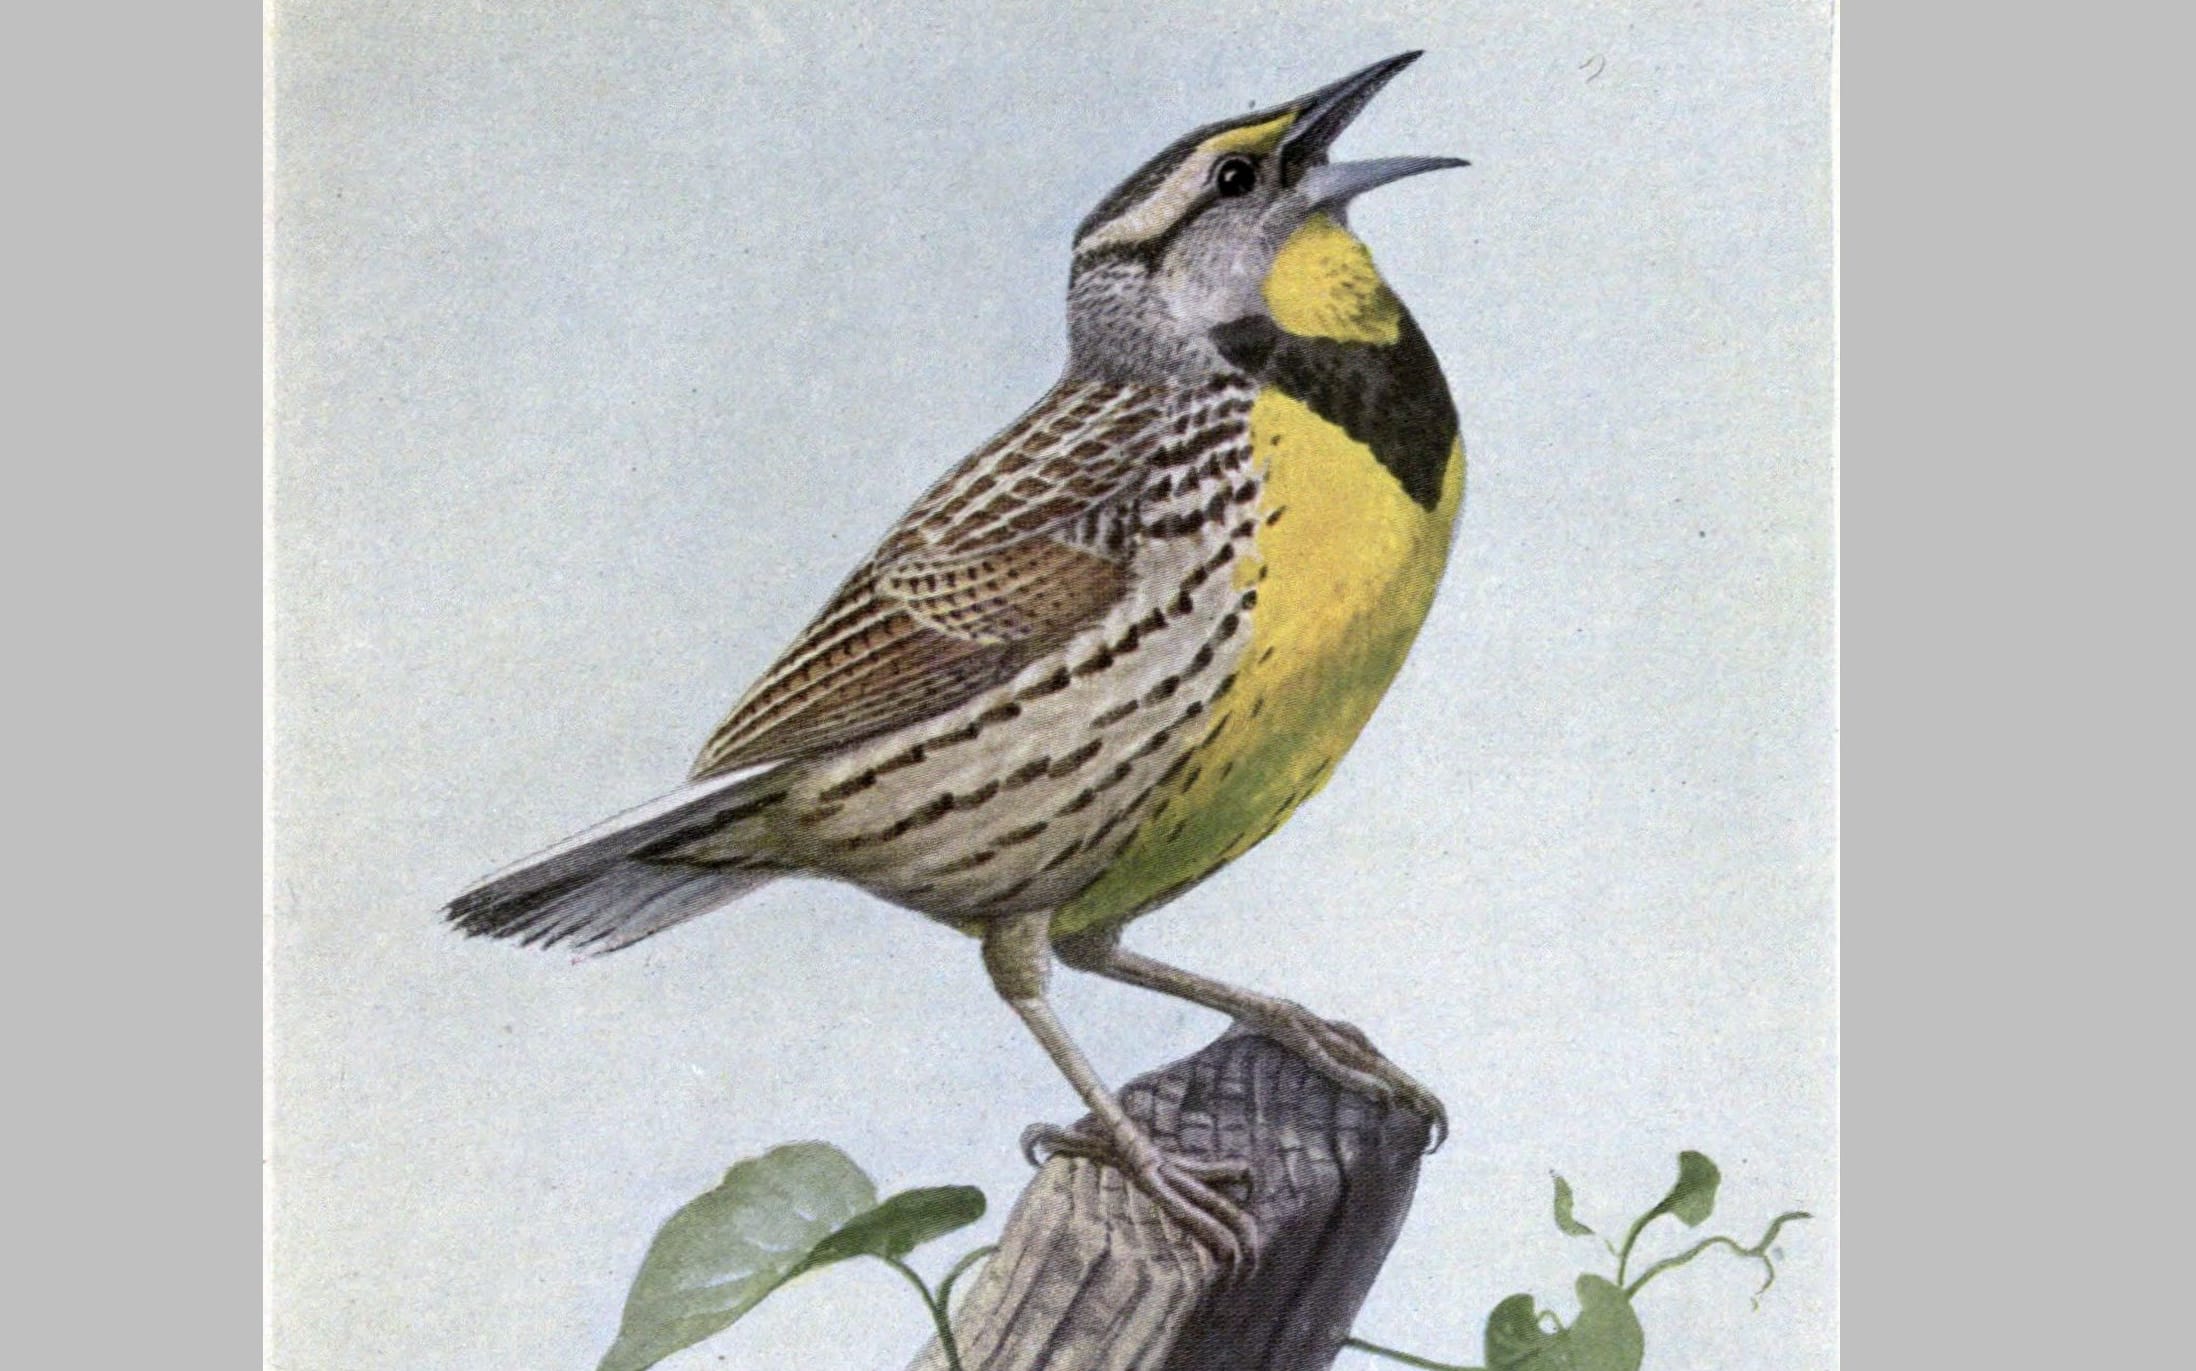 Carol the Meadow Lark. Illustration by Louis Agassiz Fuertes of an Eastern Meadowlark (Sturnella magna), from The Burgess Bird Book for Children